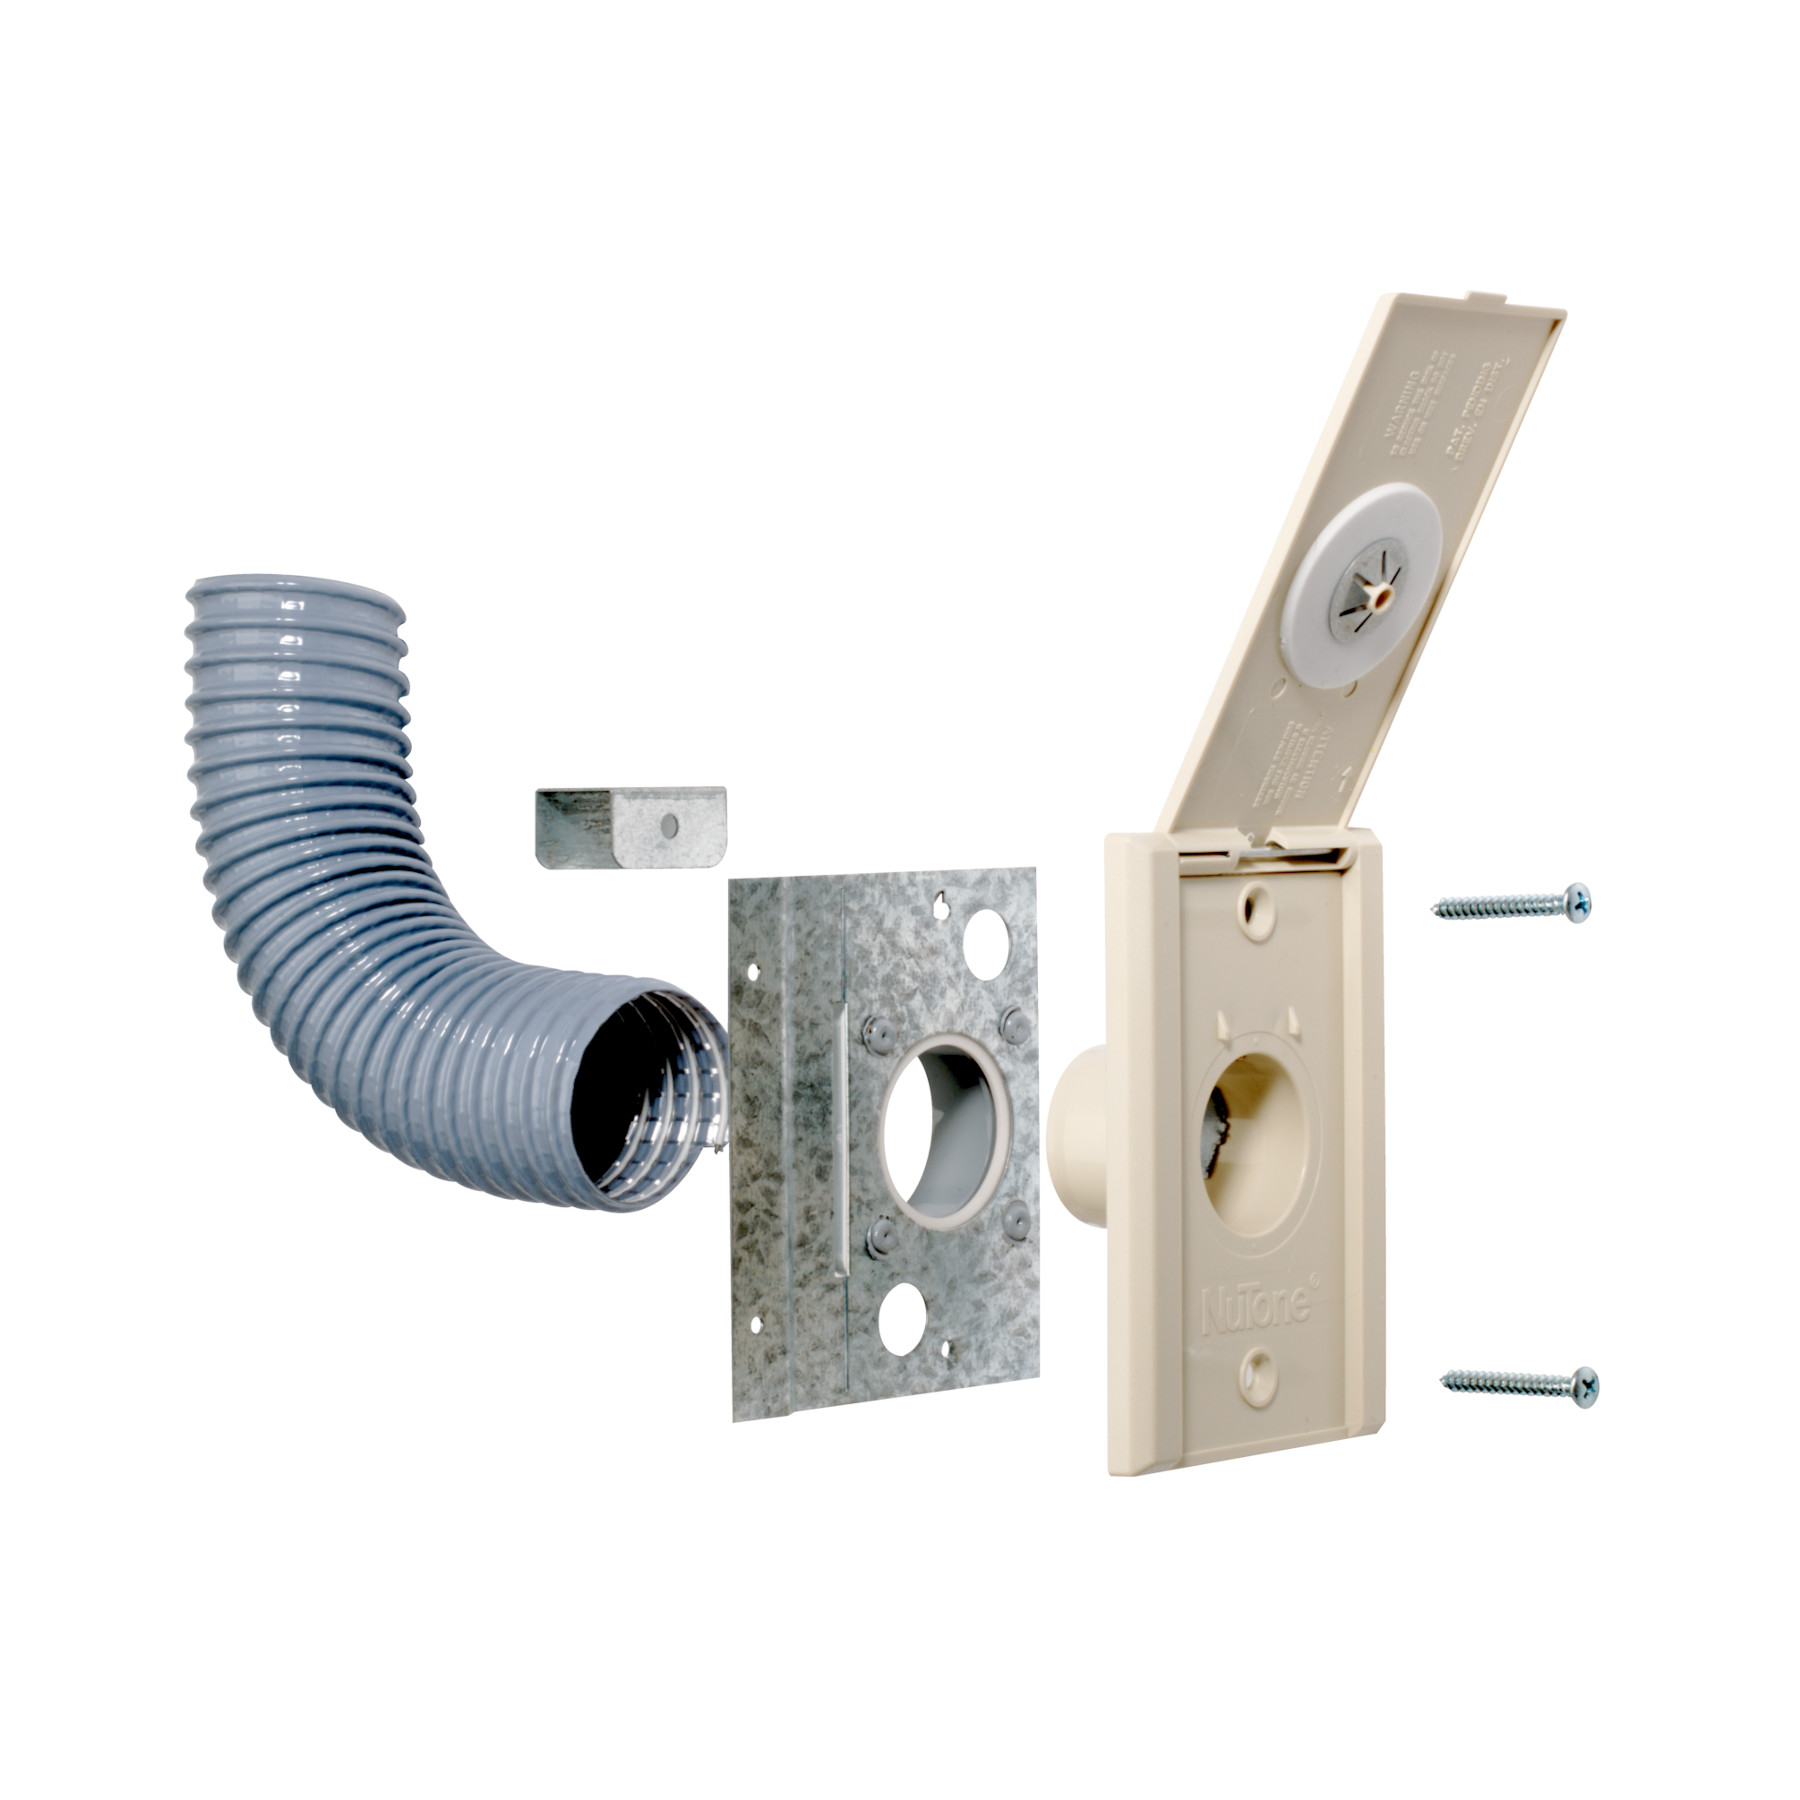 NuTone® Existing Home Inlet Kit